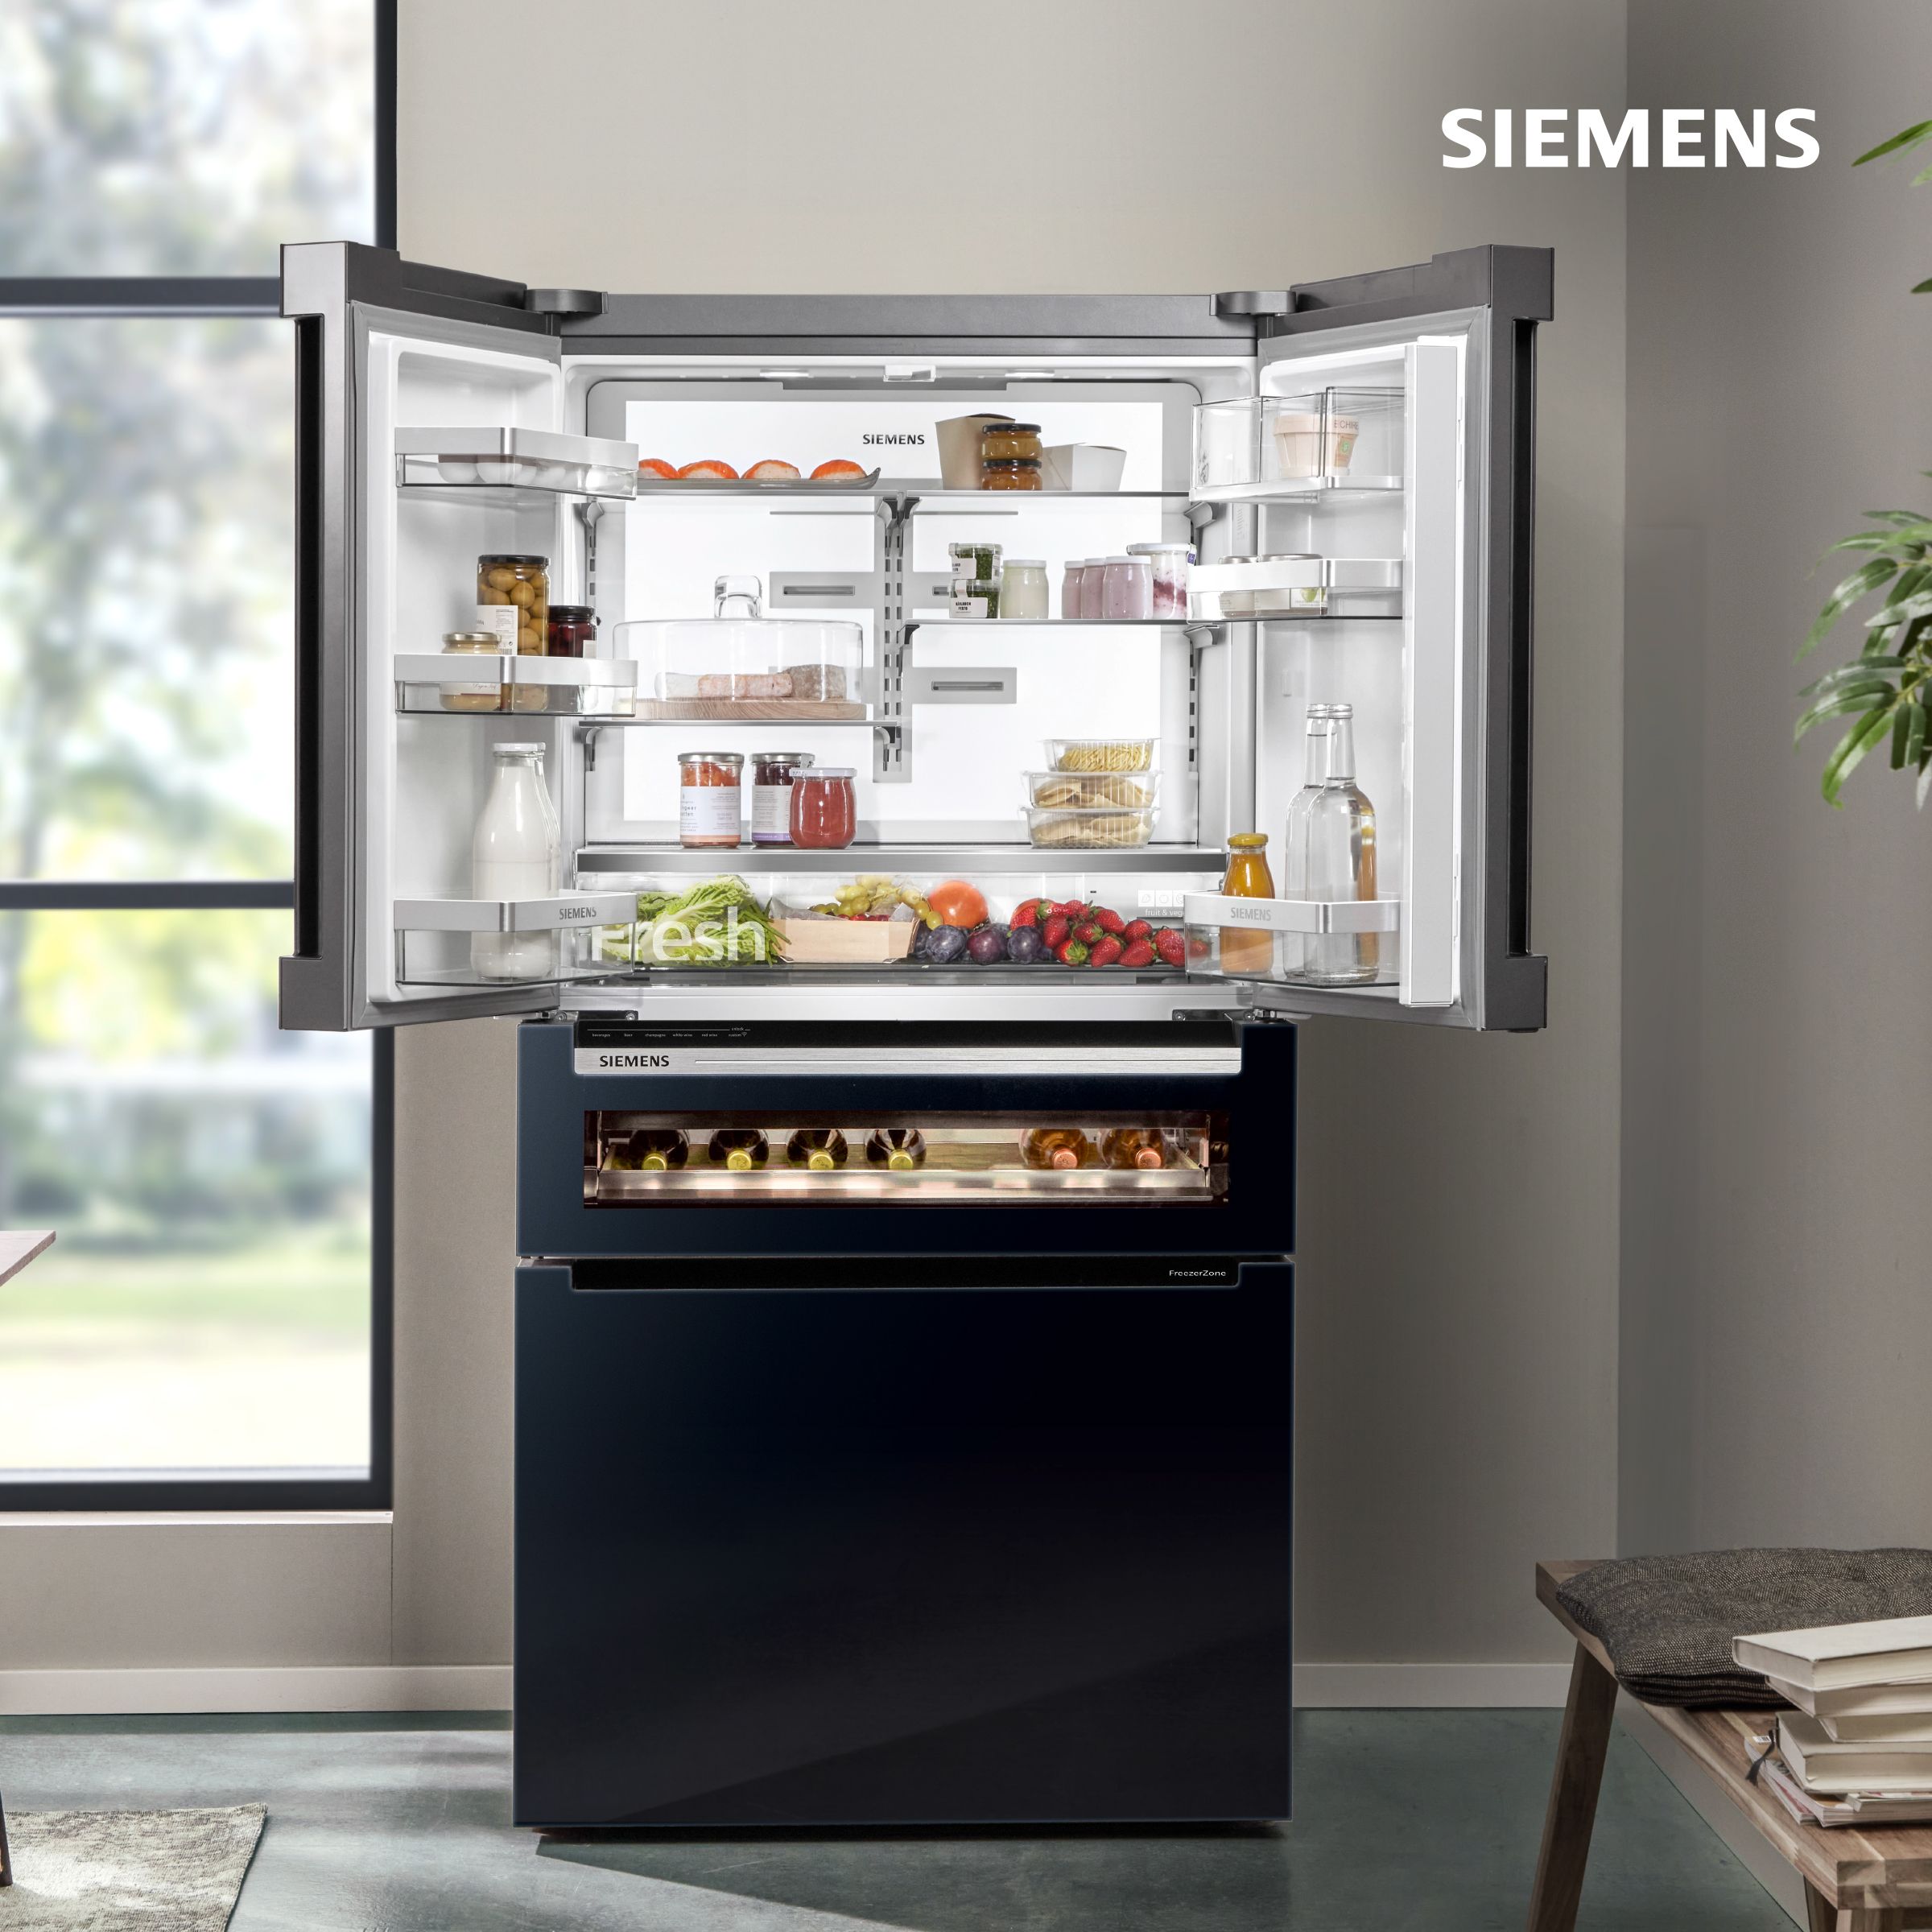 Keep it cool with Siemens - lifestyle shot of a Siemens fridge fully stacked in a kitchen